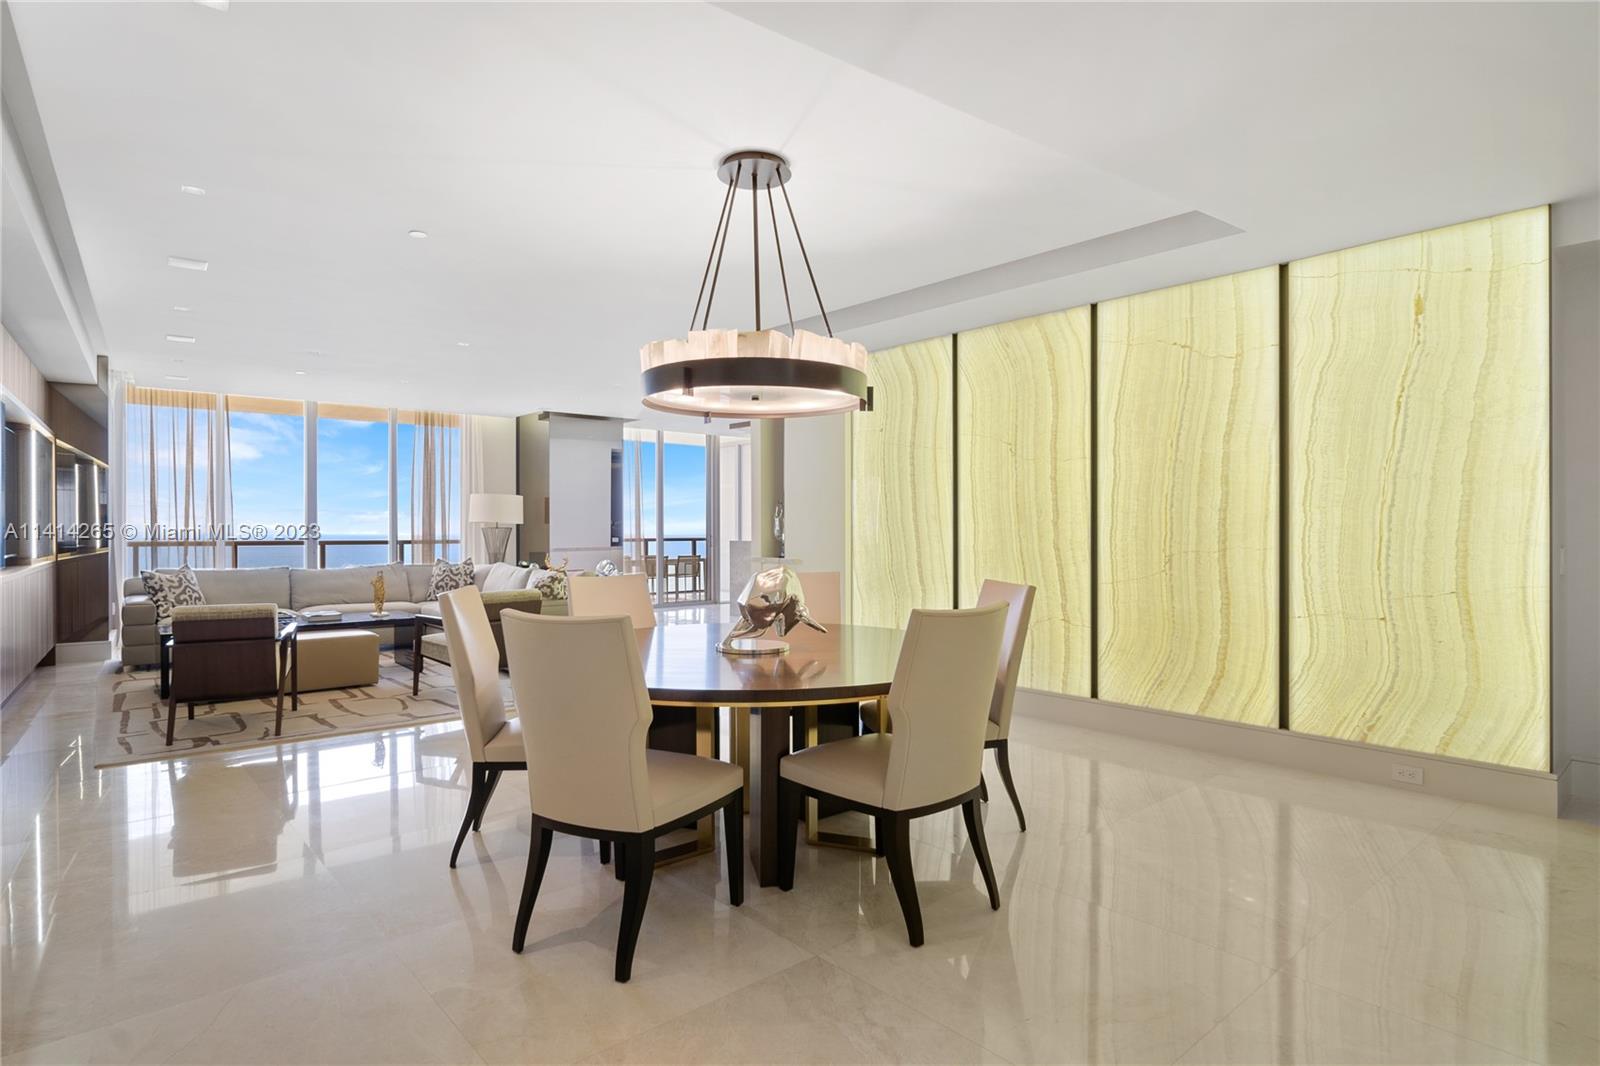 Just reduced! One of the kind turn-key unit! Three bedroom apartment with 3.5 bath. Designer furnished and decorated throughout with: custom built-ins and cabinetry, automatic blinds, smart home system etc. The unit is in brand new condition since it was rarely ever occupied. Enjoy luxurious life style at this 5 star exclusive property at St Regis Bal Harbour. Negotiable.